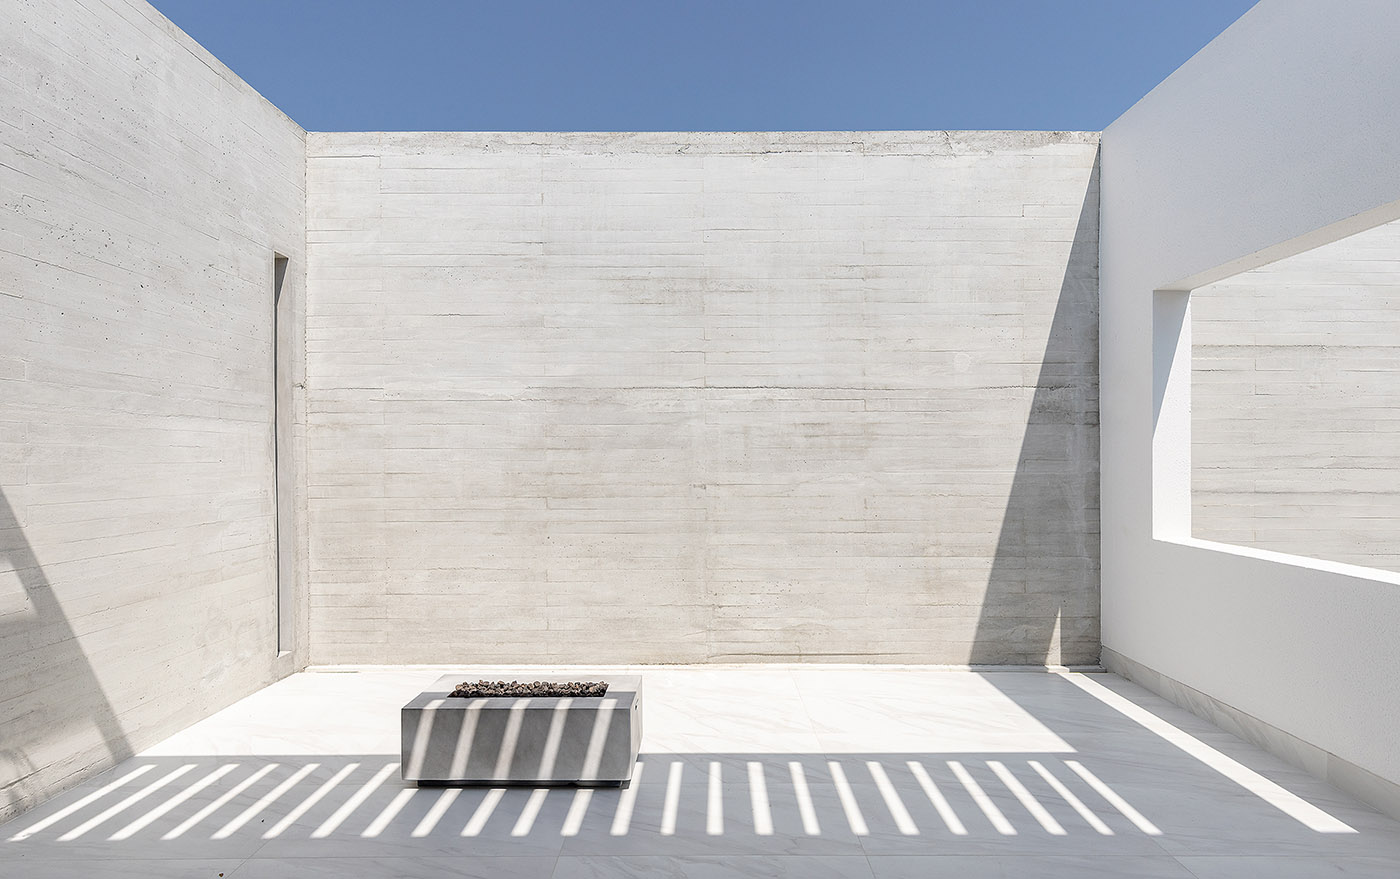 Casa Mocoli: a fascinating sculpture with purist lines for an encounter with yourself